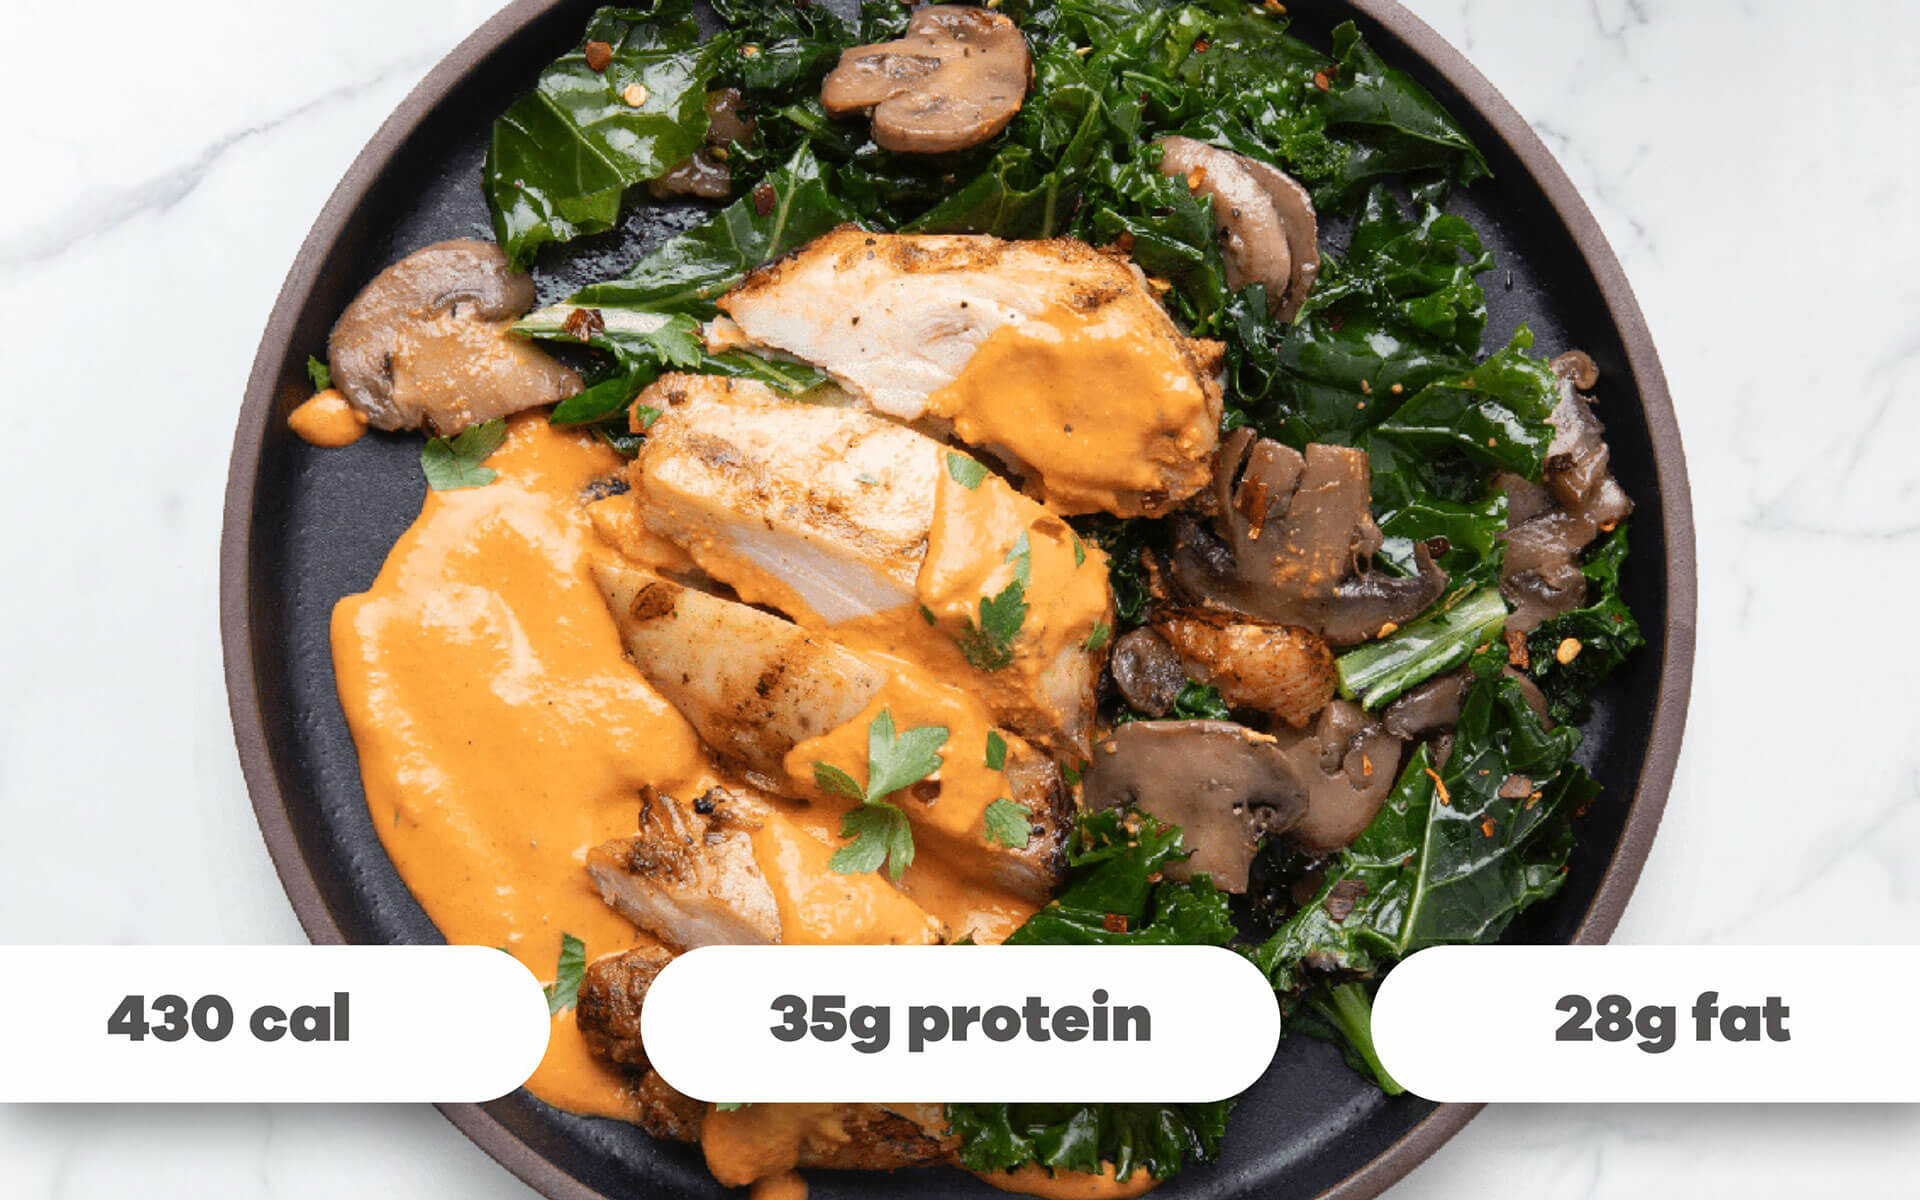 plate of chicken with mushrooms, greens and a creamy sauce with nutrition labels